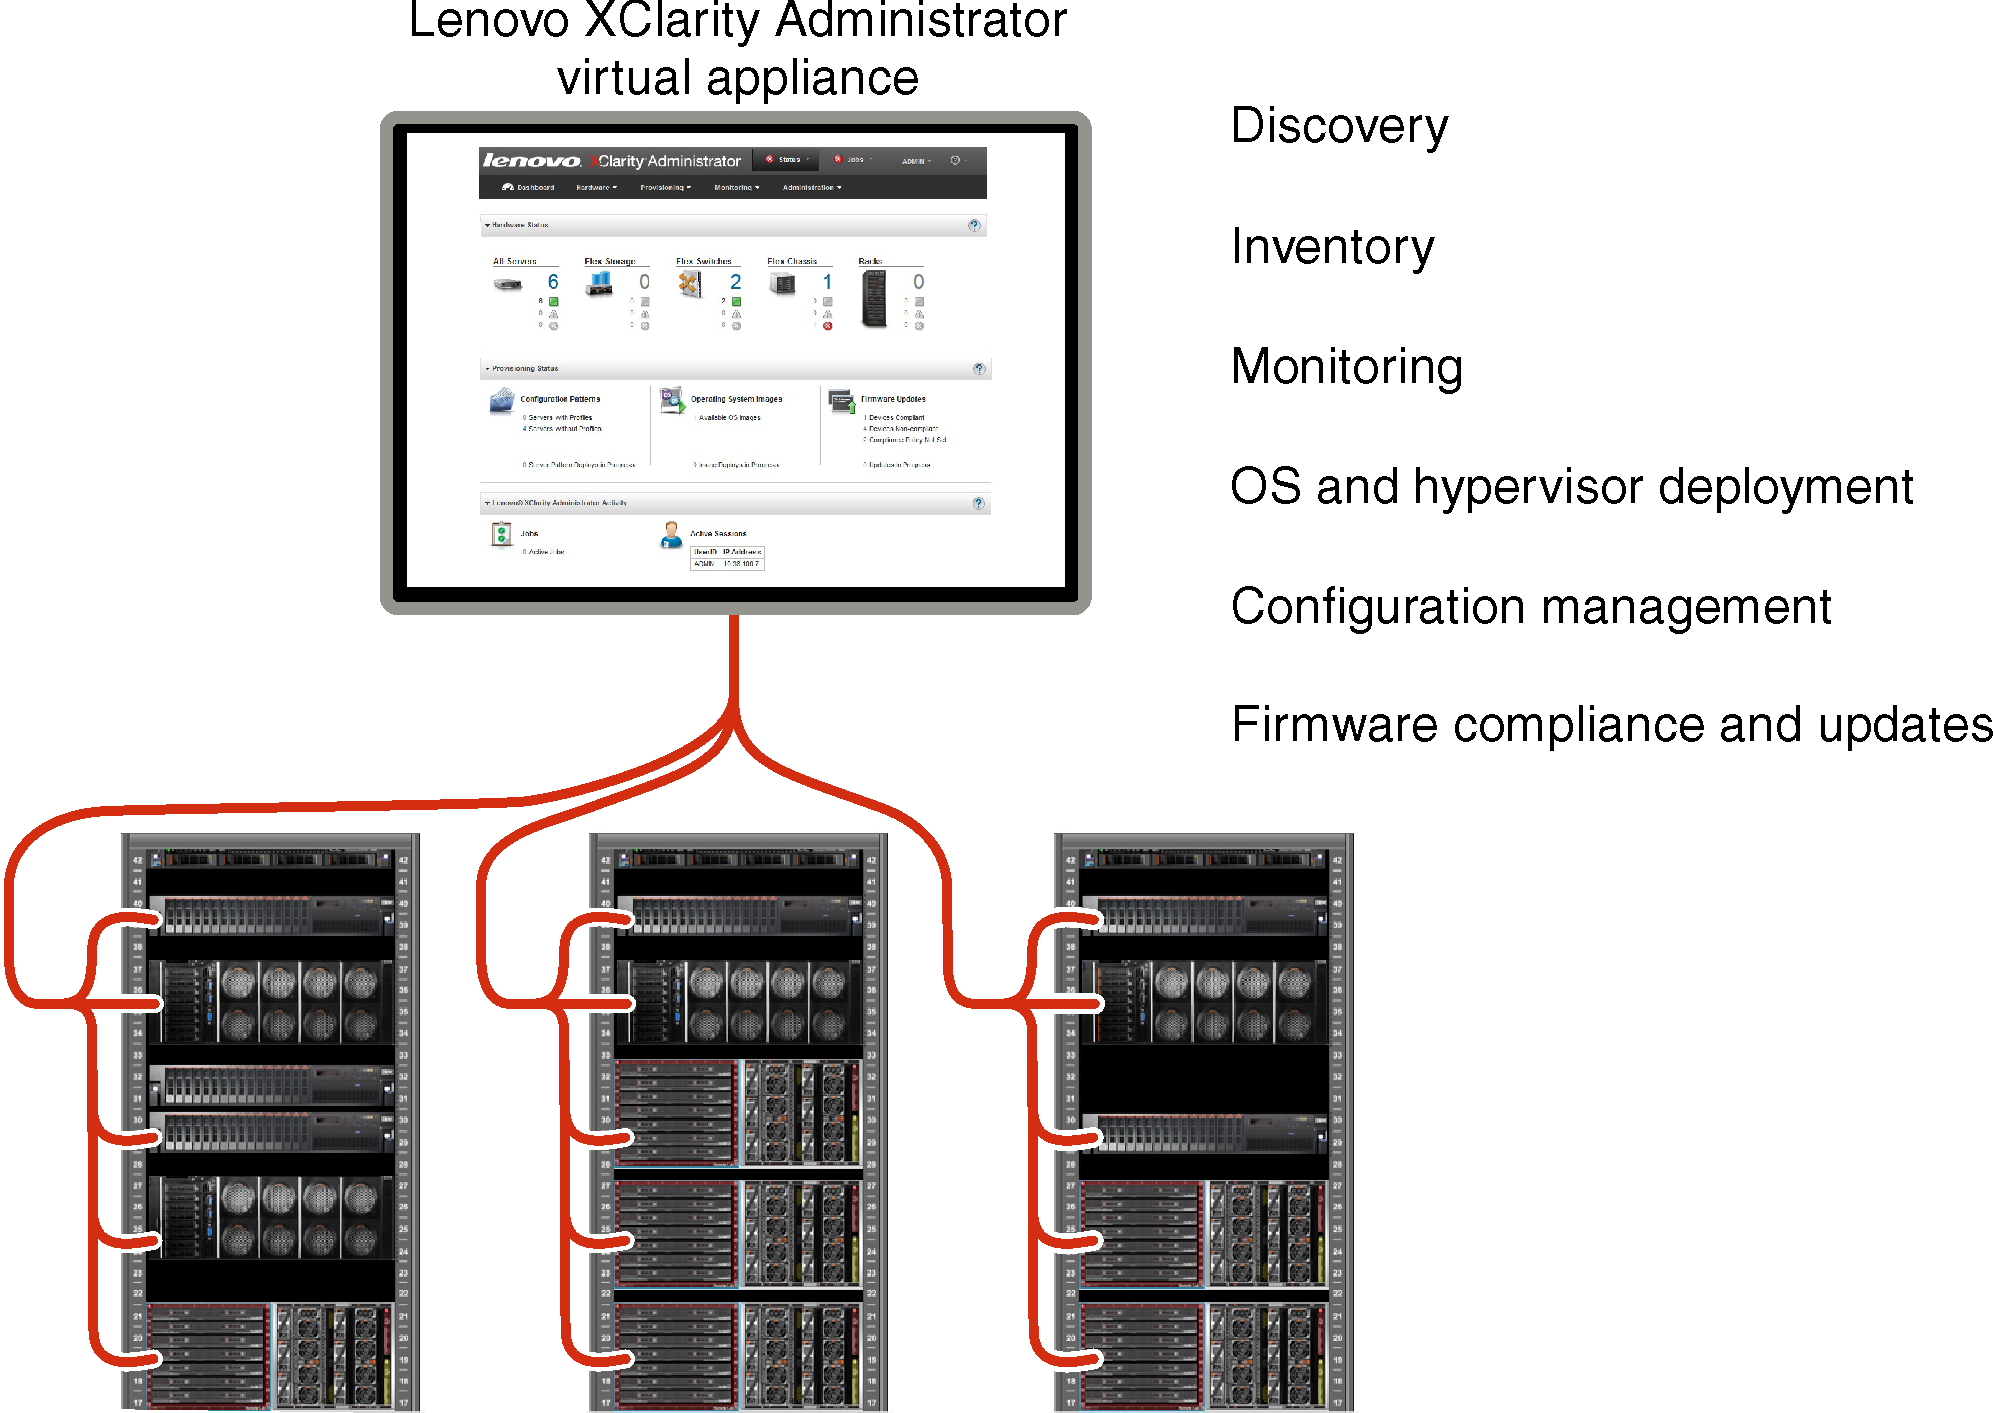 Graphic showing Lenovo XClarity Administrator managing several chassis and listing the main features of the Lenovo XClarity Administrator.